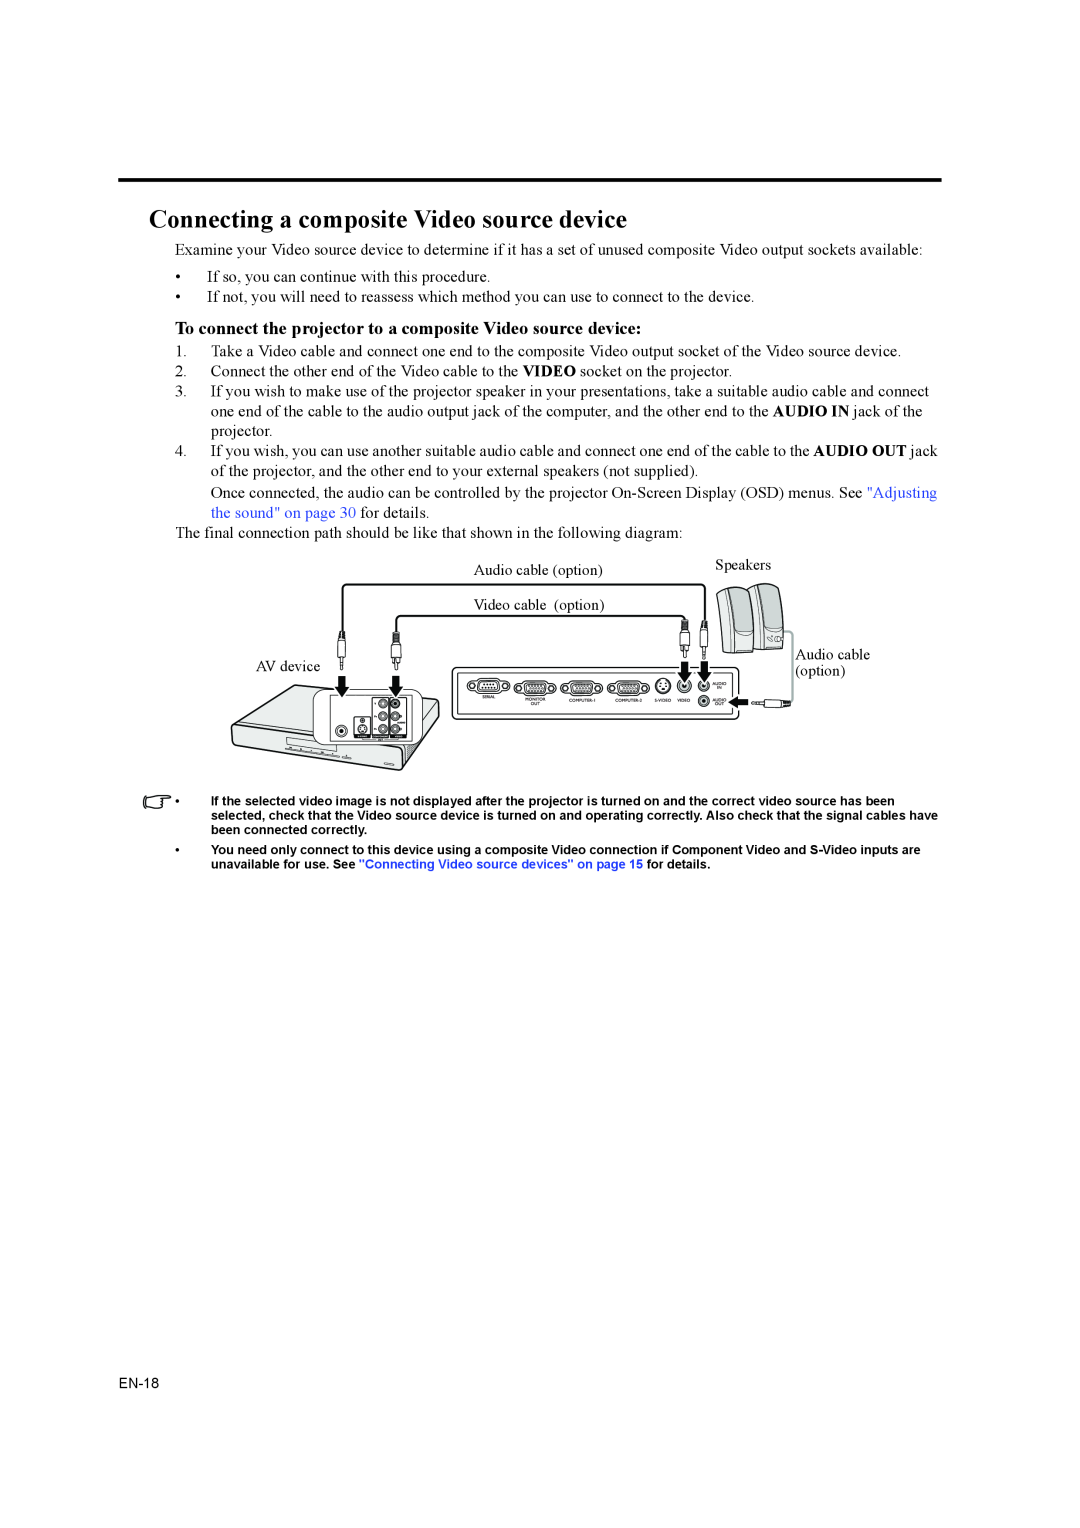 Mitsubishi Electronics EX200U, ES200U Connecting a composite Video source device, the sound on page 30 for details 